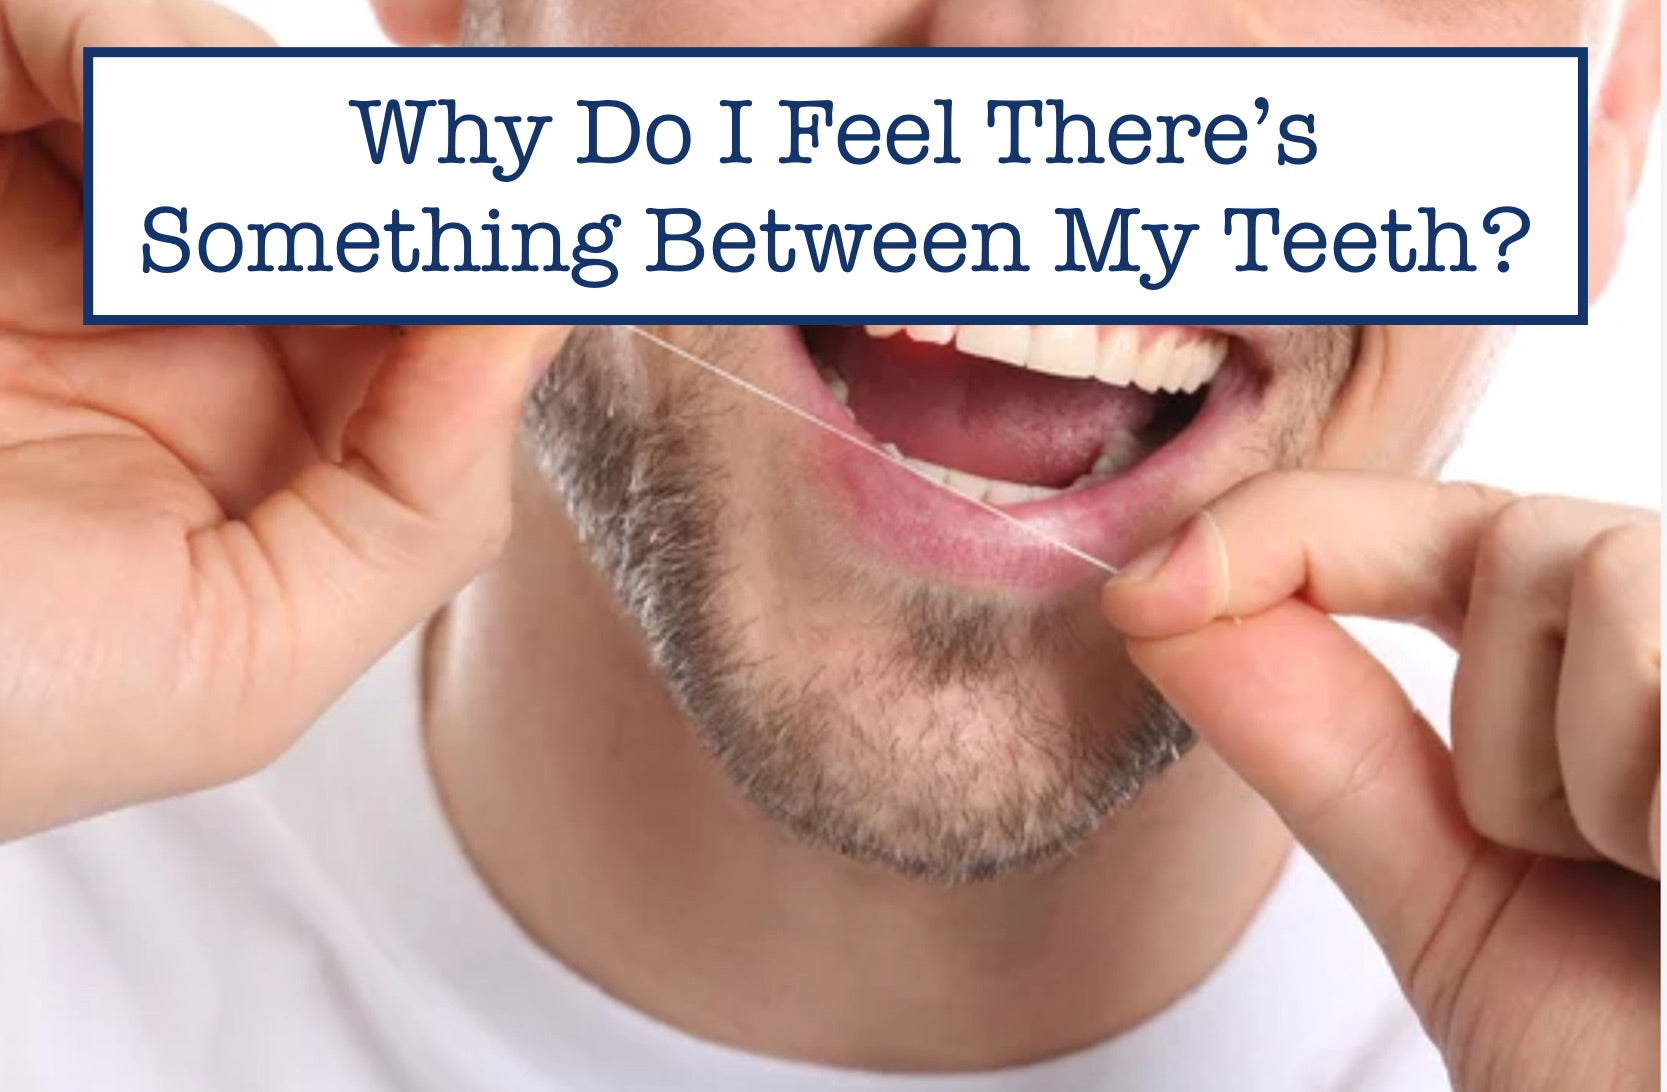 Why Do I Feel There’s Something Between My Teeth?